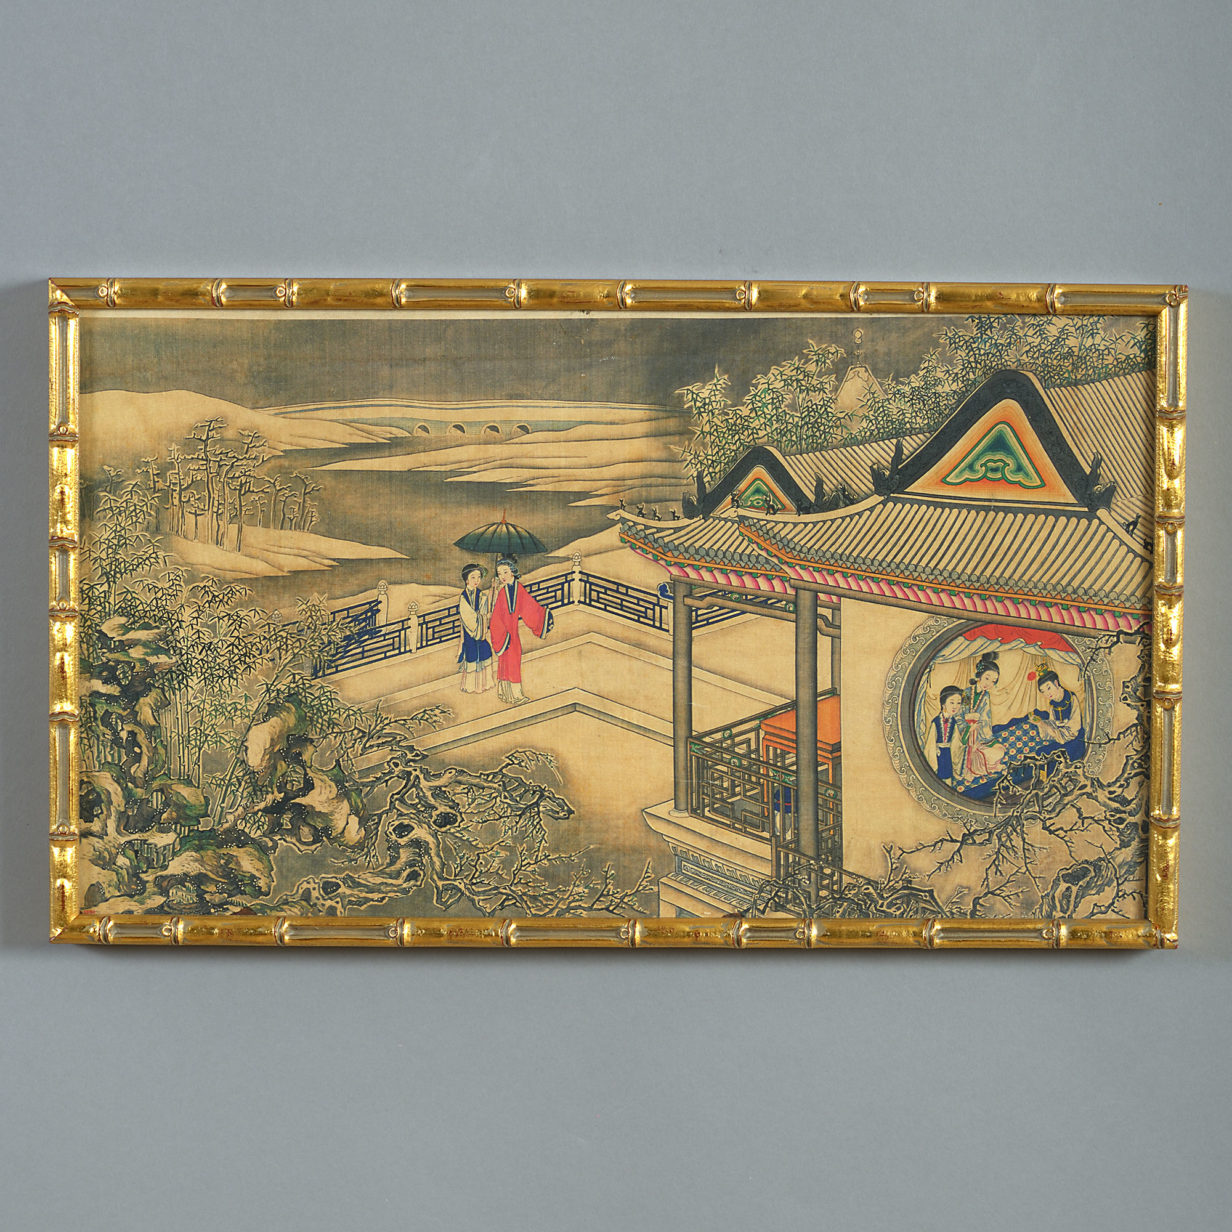 19th century pair of ink and colour landscapes depicting scenes of court life